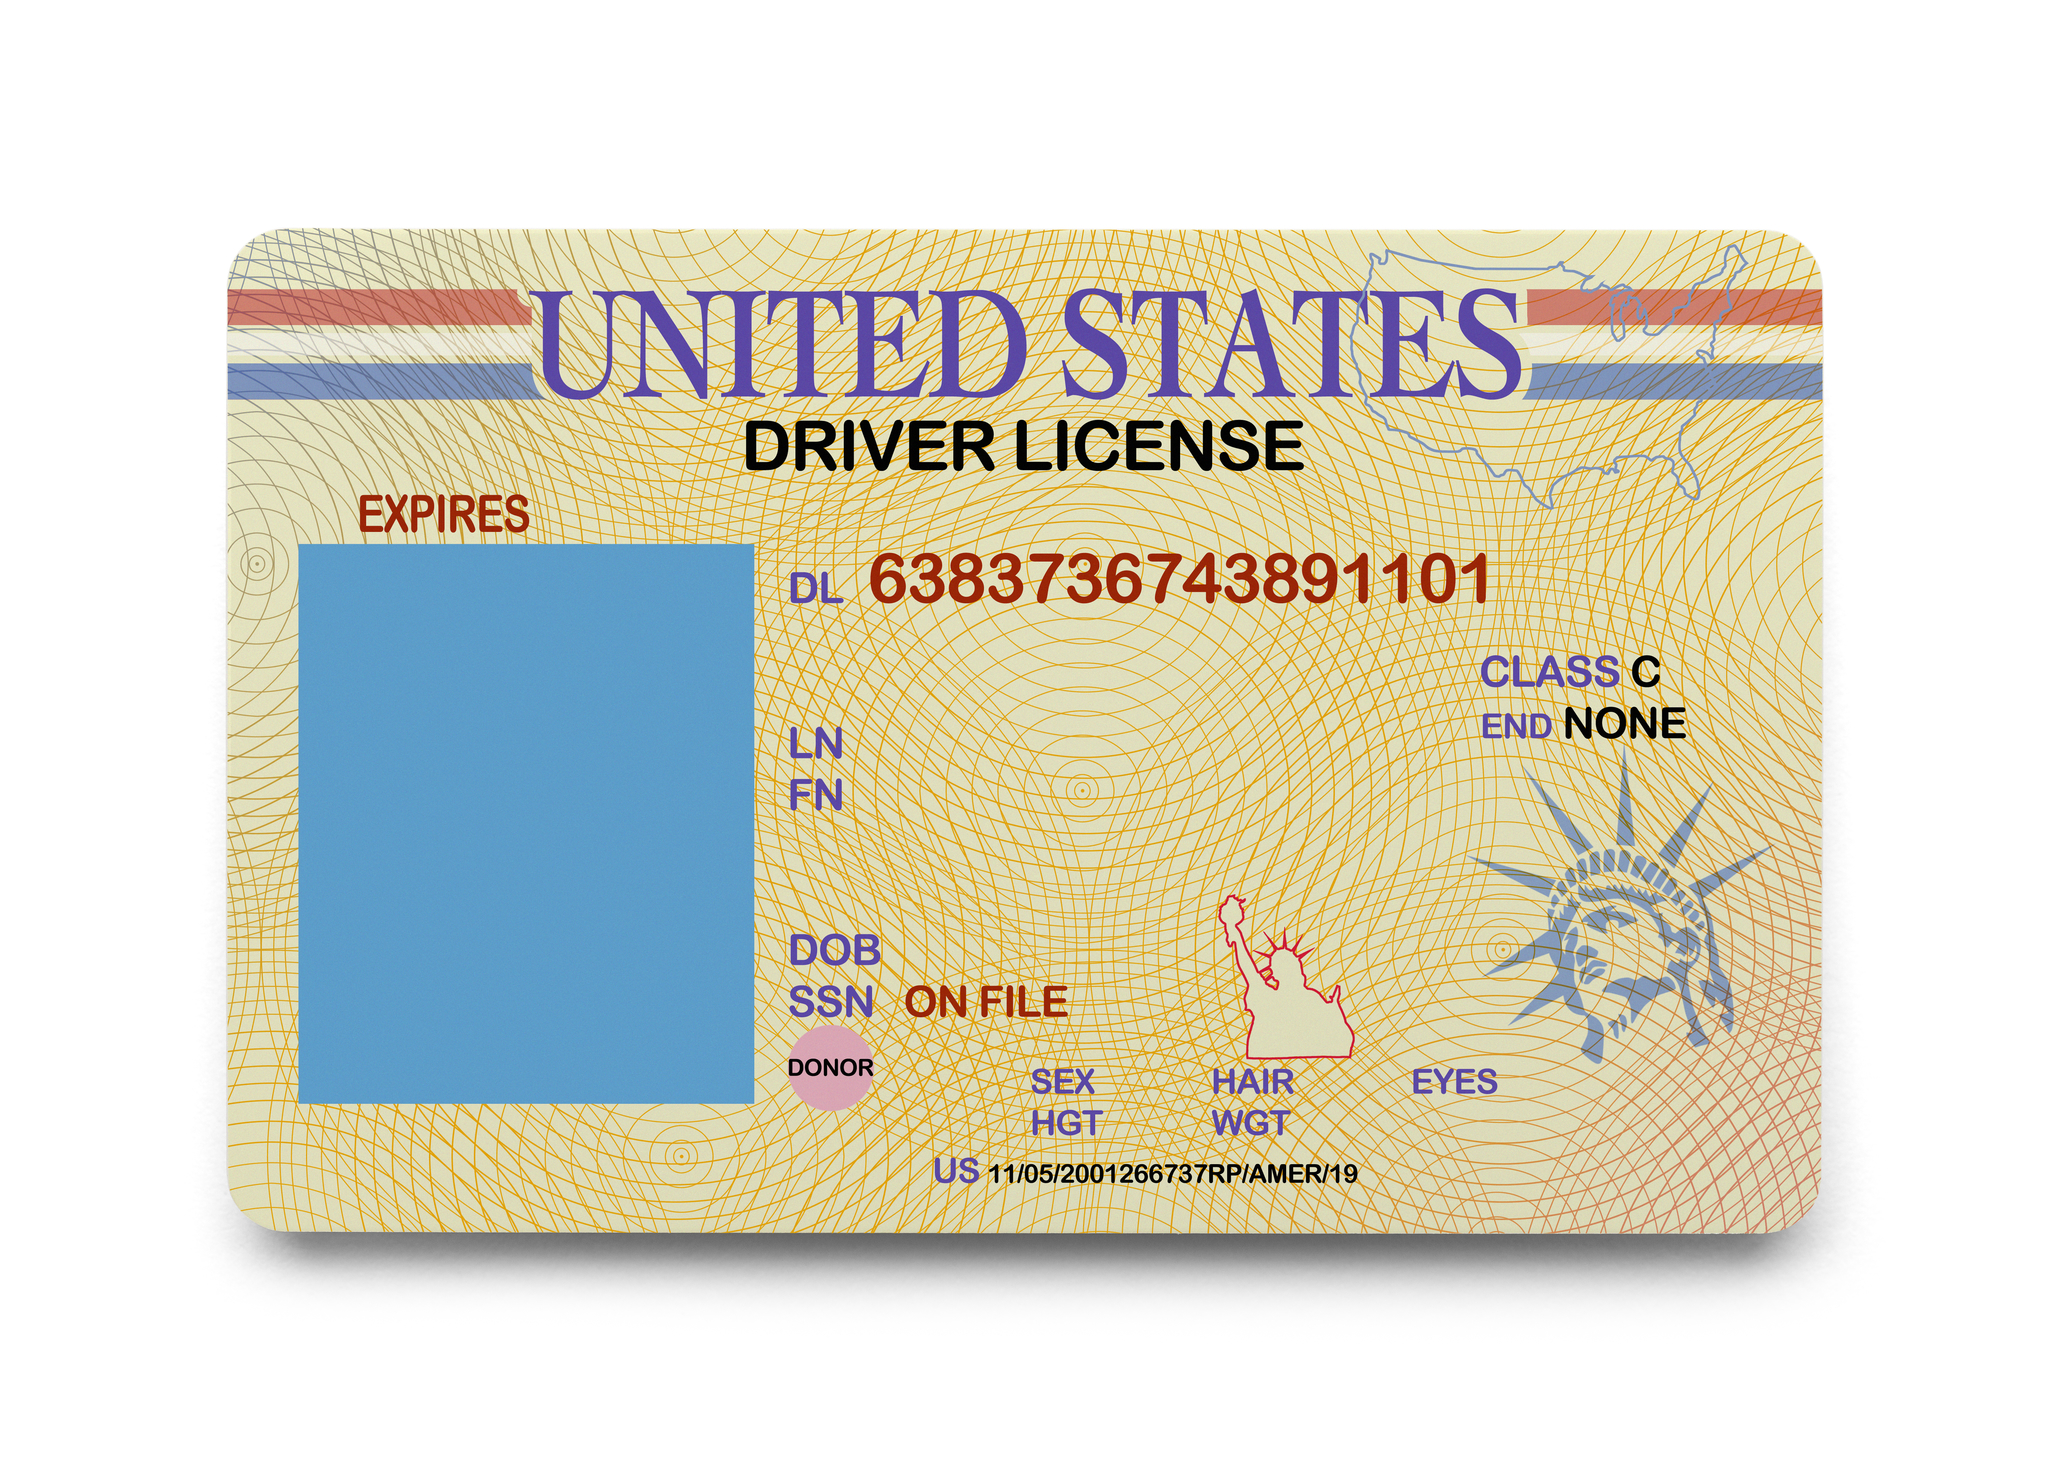 Feds Extend Pennsylvania and New Jersey Real ID Deadlines to Prevent COVID-19 Spread at DMV Offices